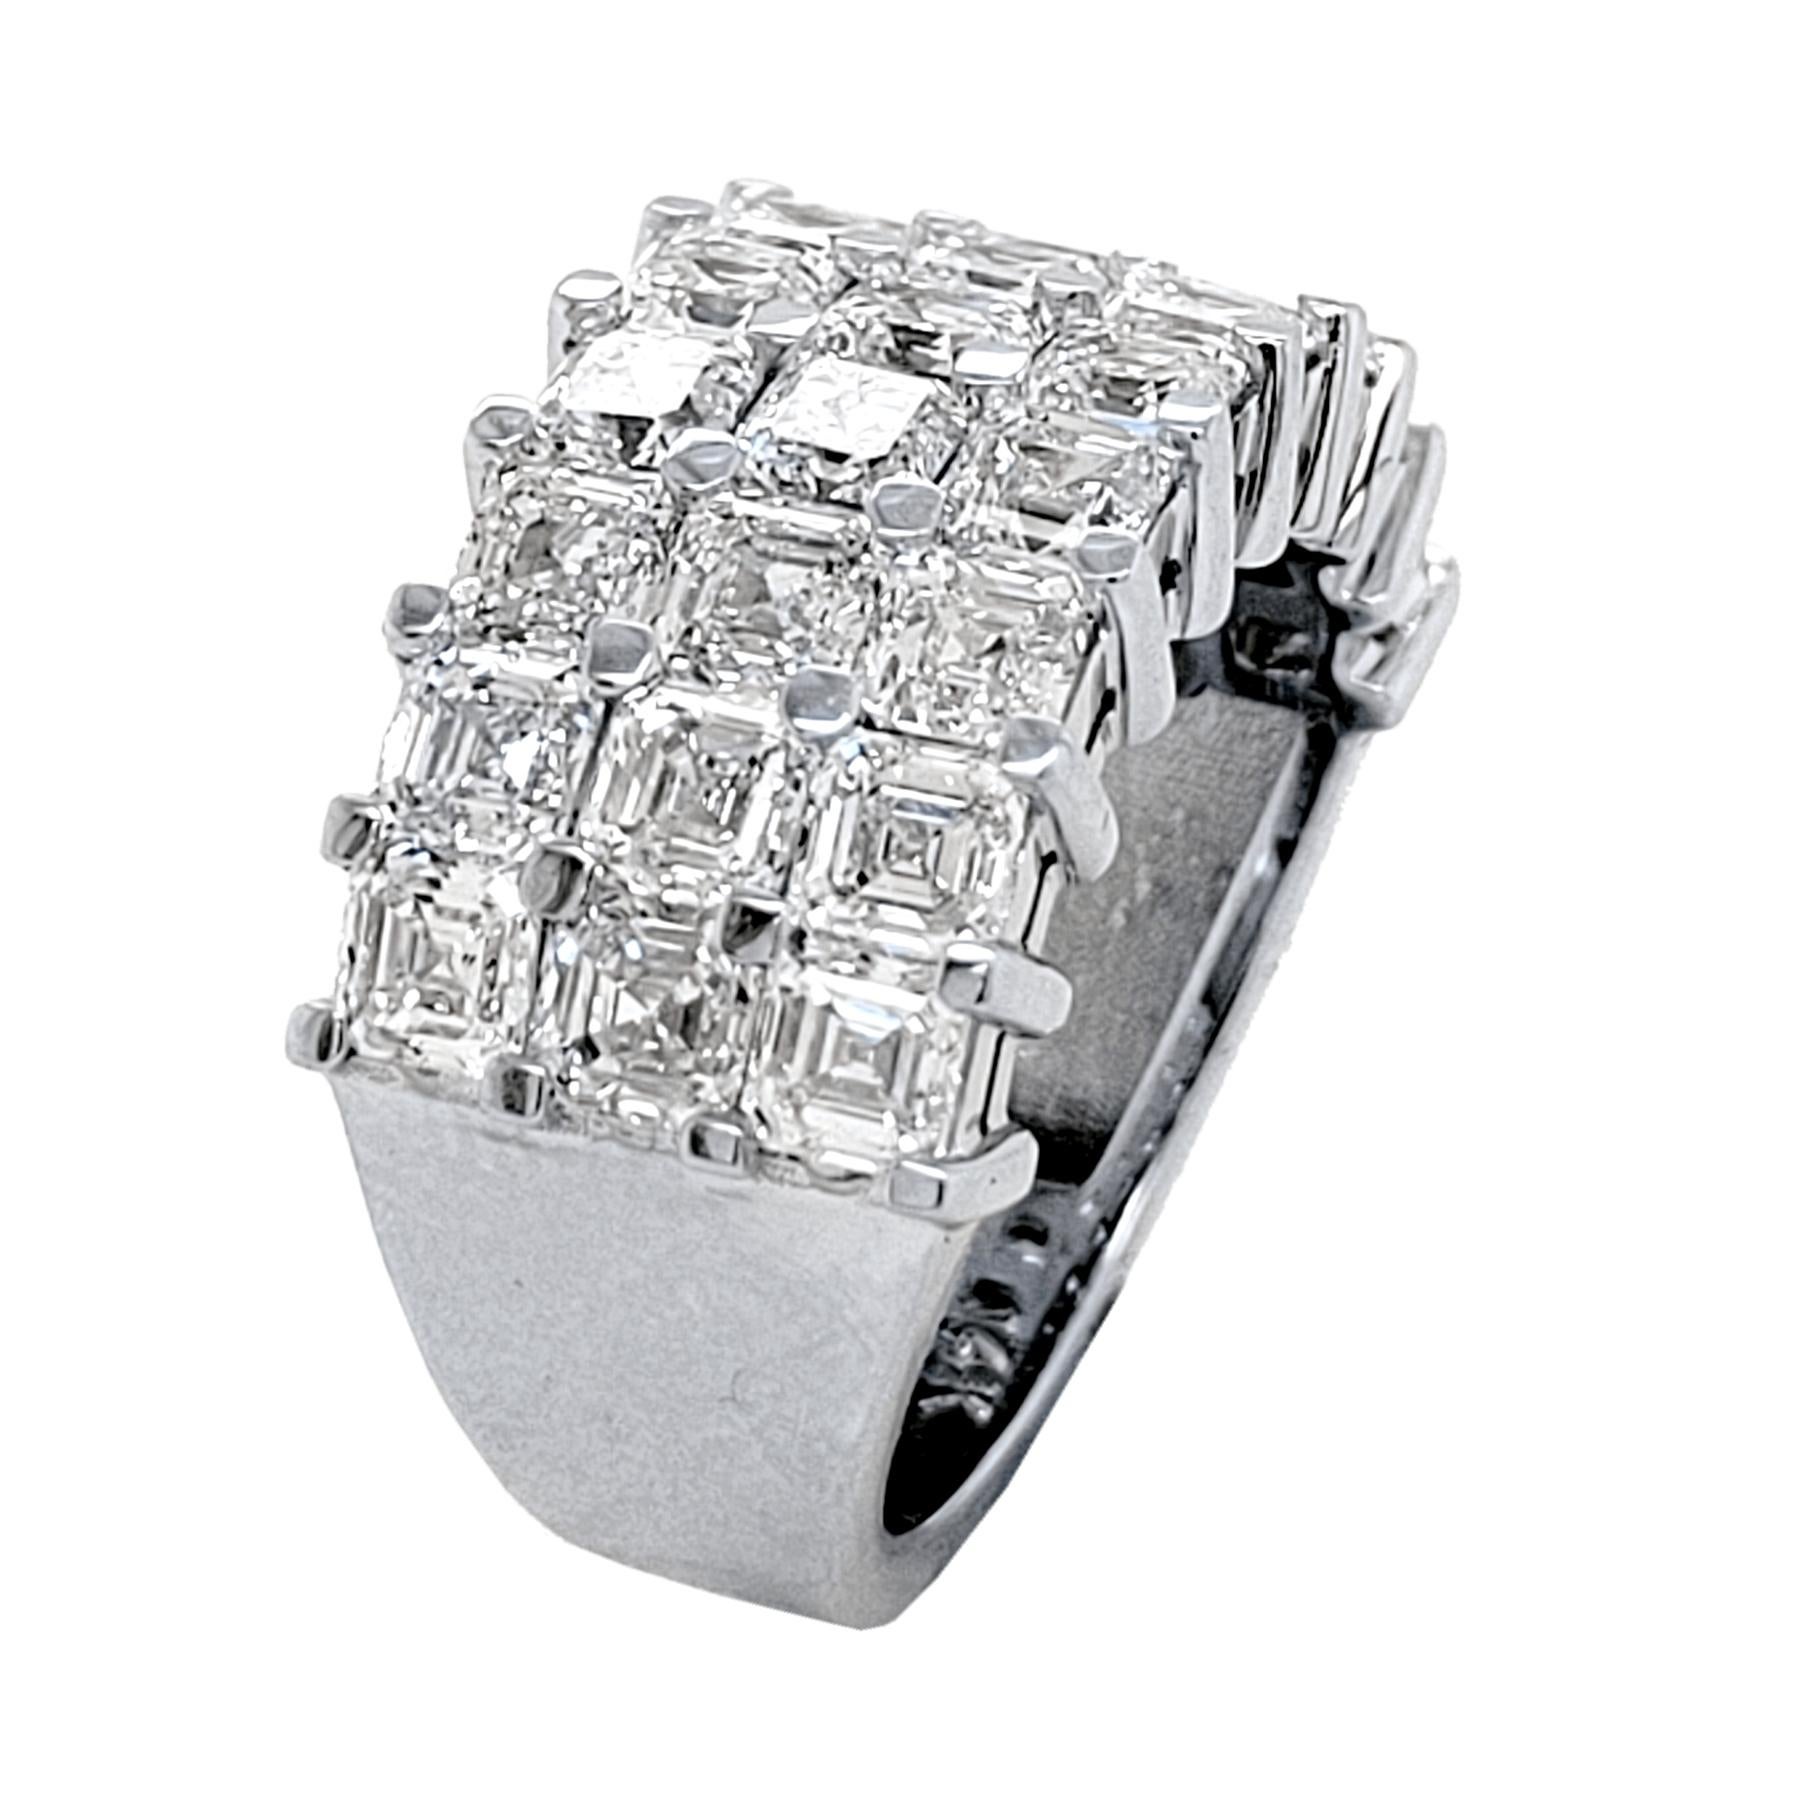 This beautiful Anniversary Ring is made of 14 Karat White gold showcasing 27 perfectly matched Asscher Cut (Square Emerald Cut) Diamonds Set in Shared Prong Mode.
The diamonds are VS Clarity E to F Color.
Total Weight of diamonds: 5.31 Ct  (9 pieces